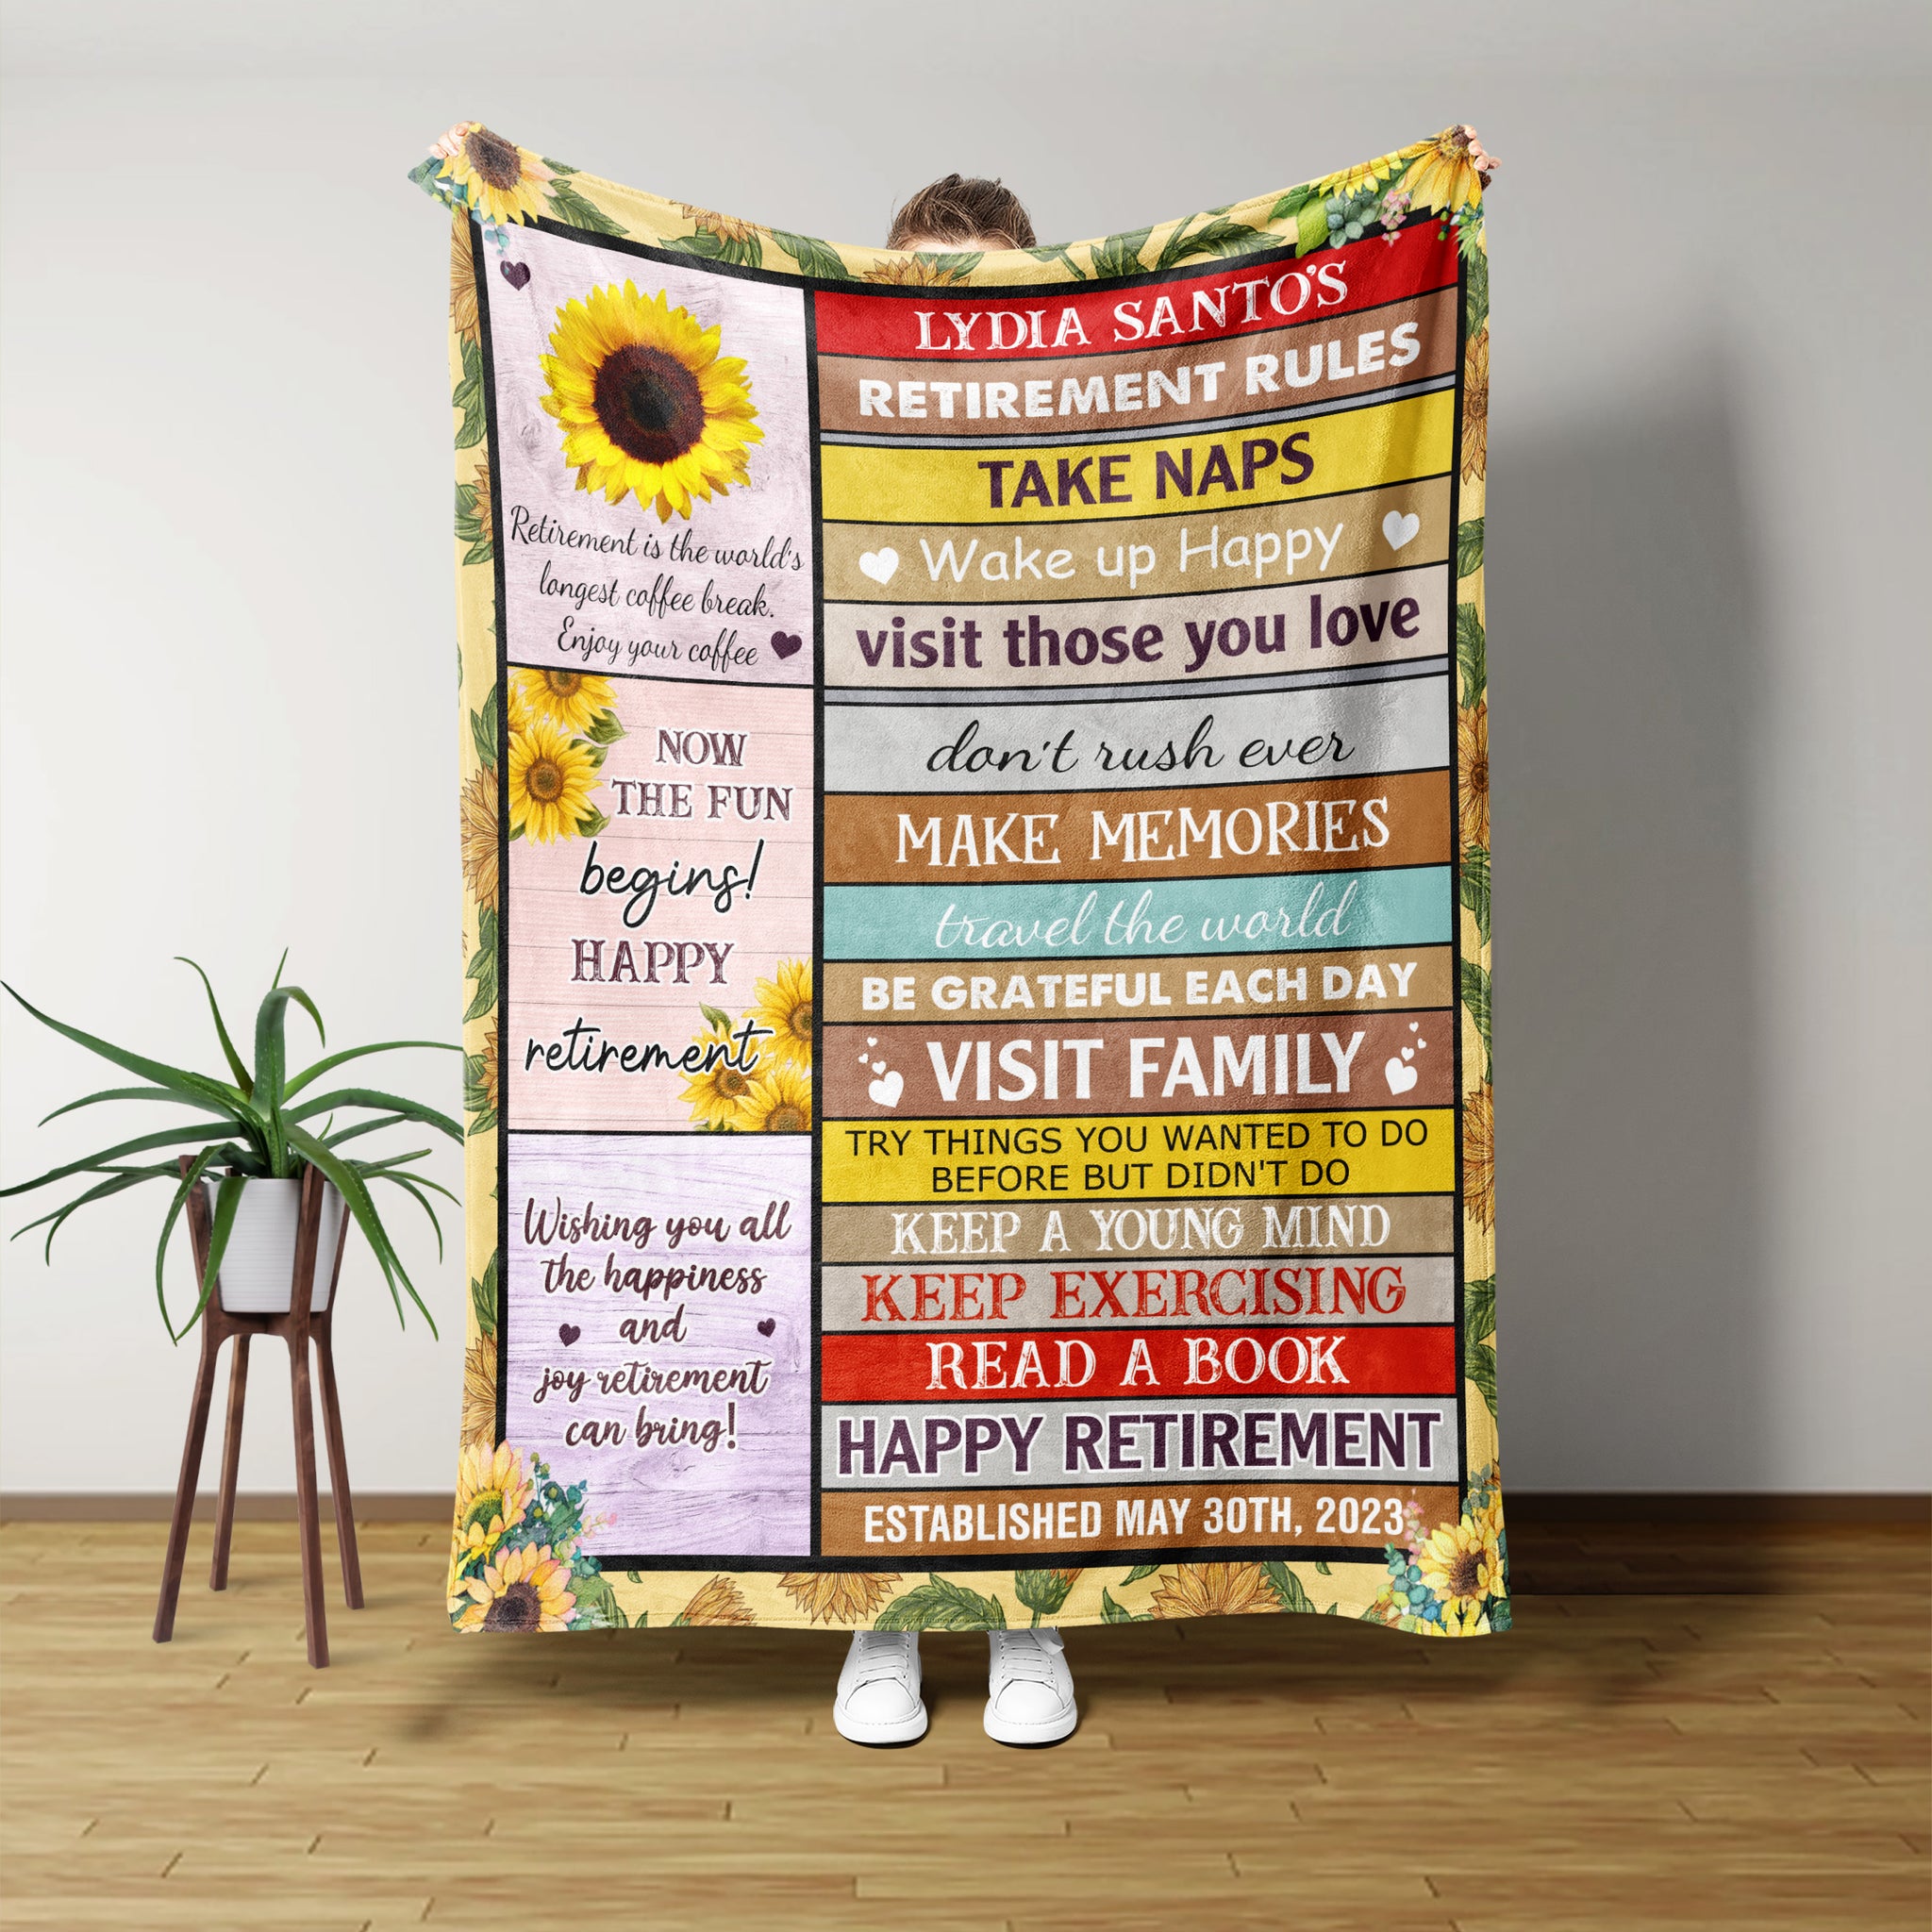 Personalized Retirement Rules Blanket, Happy Retirement 2023 Blanket, Sunflower Retirement Gift, Gifts for Coworker, Boss Gift Retirement